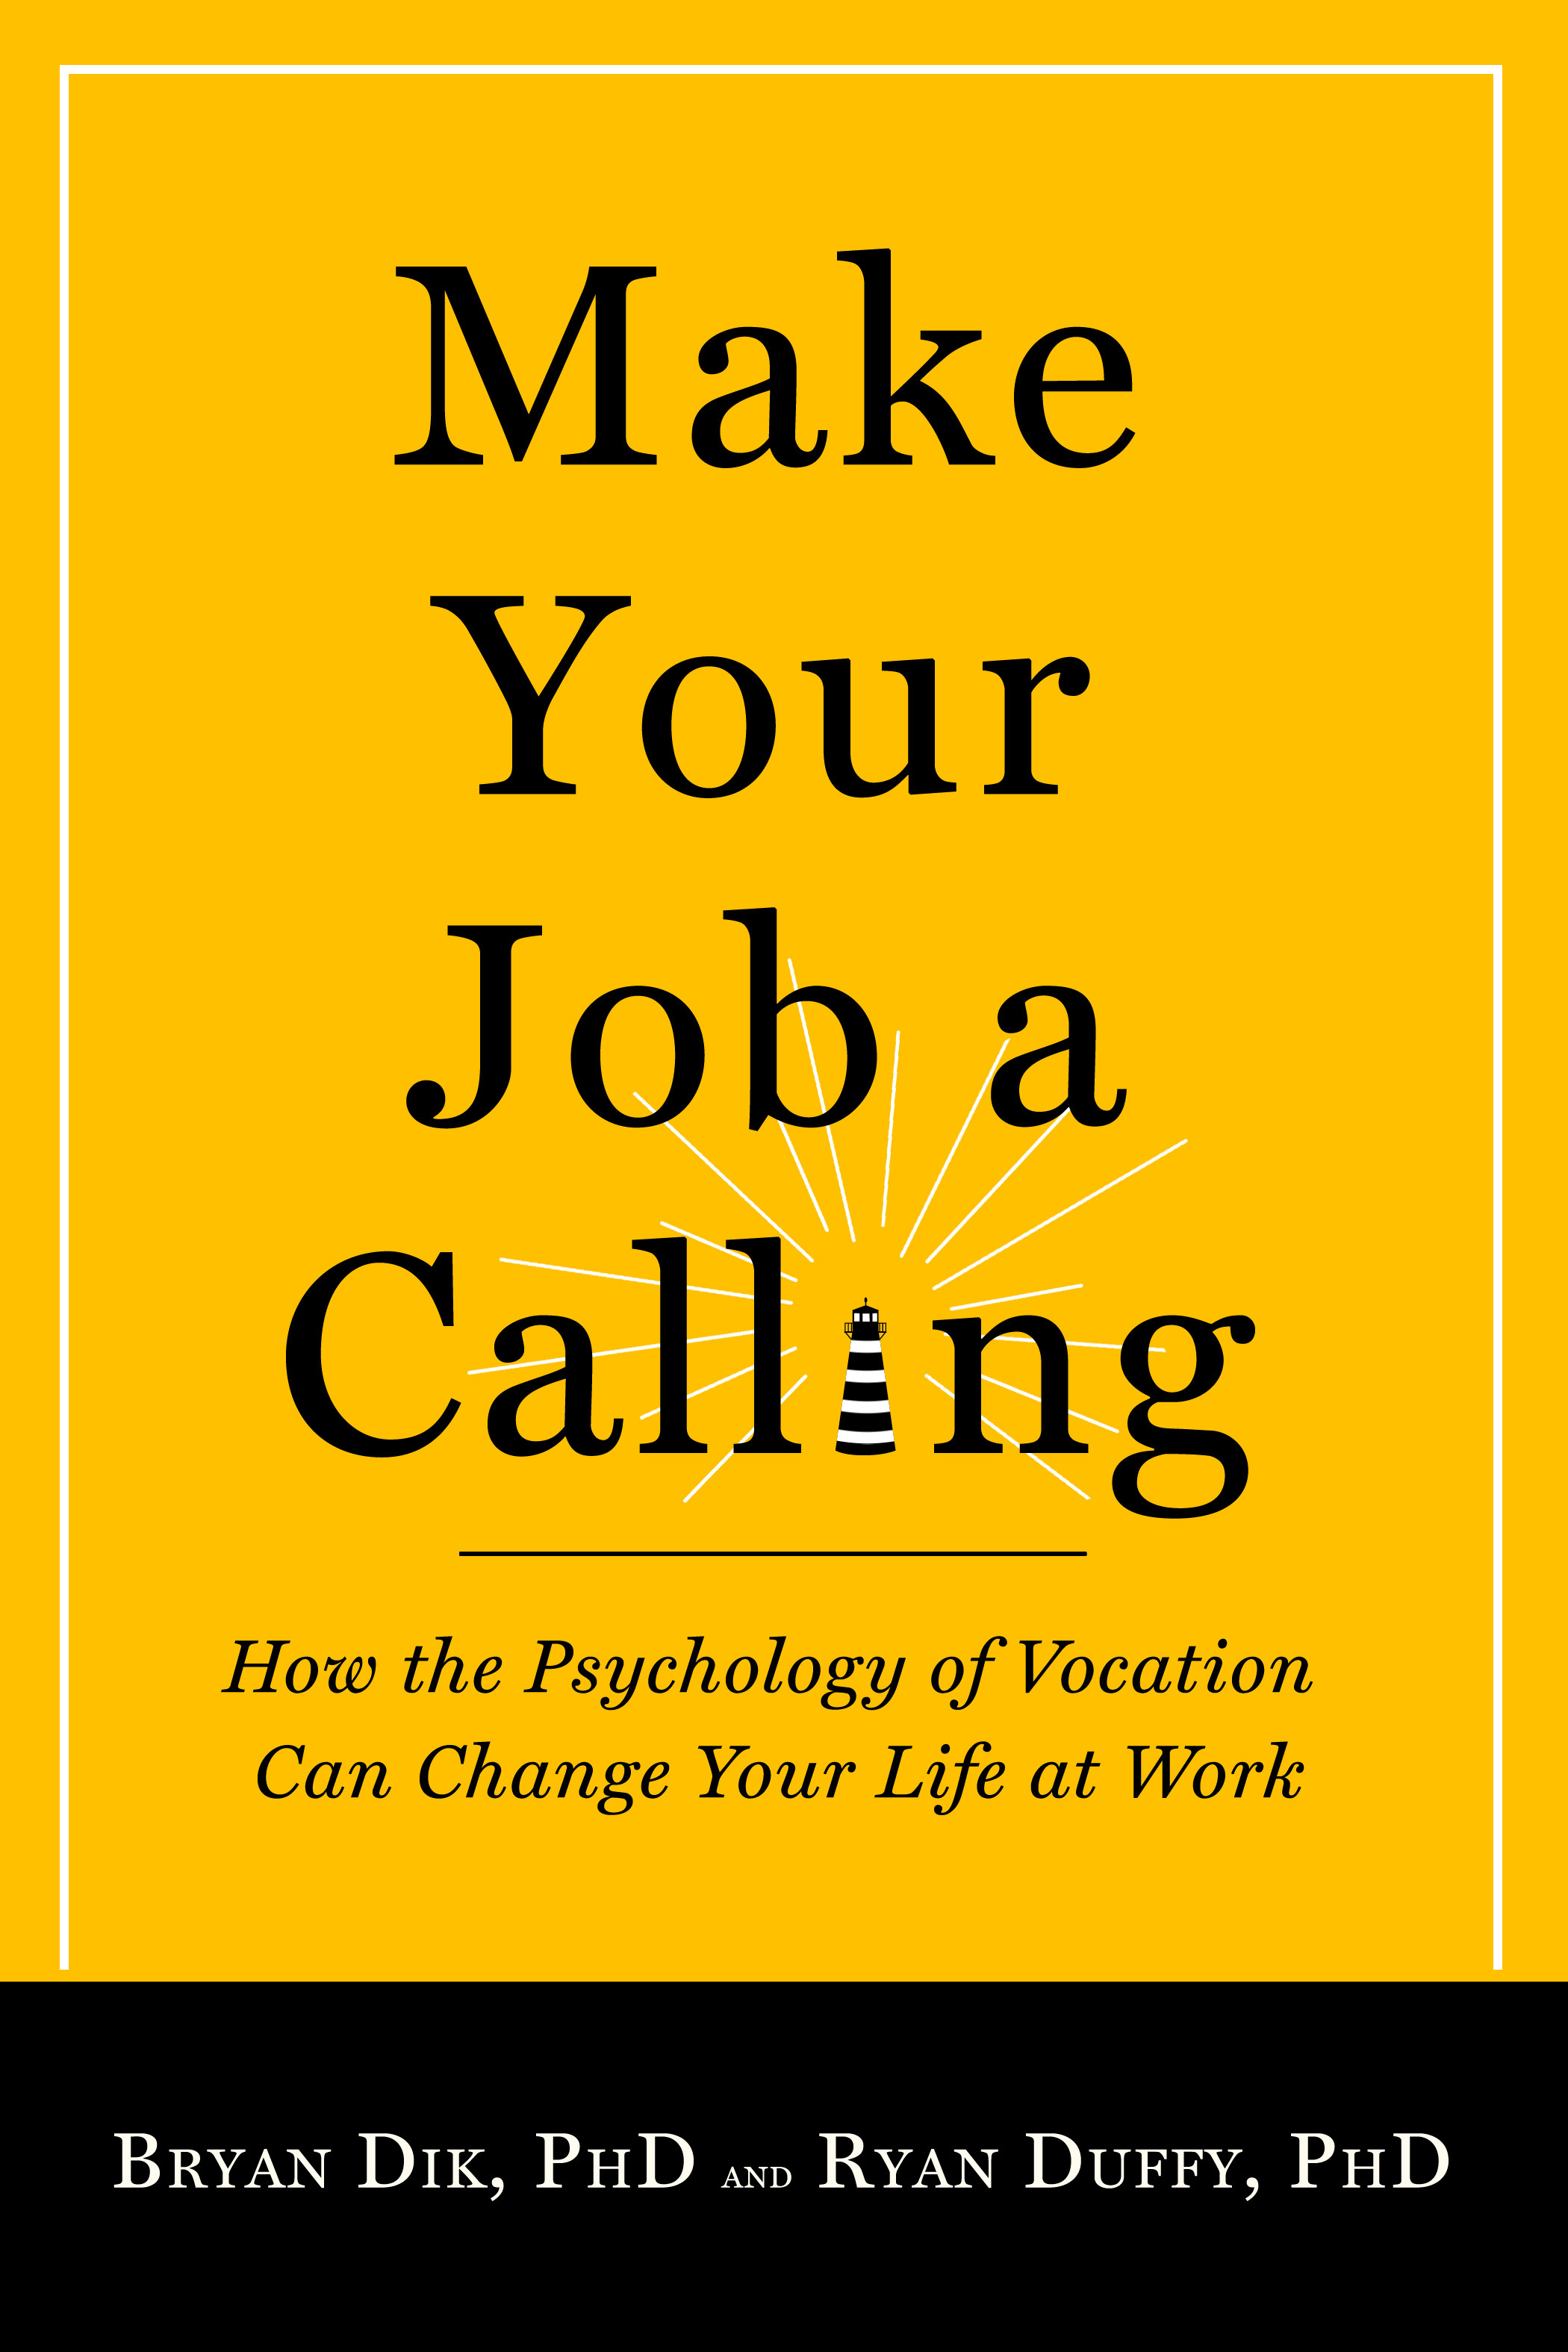 What to say when calling for jobs